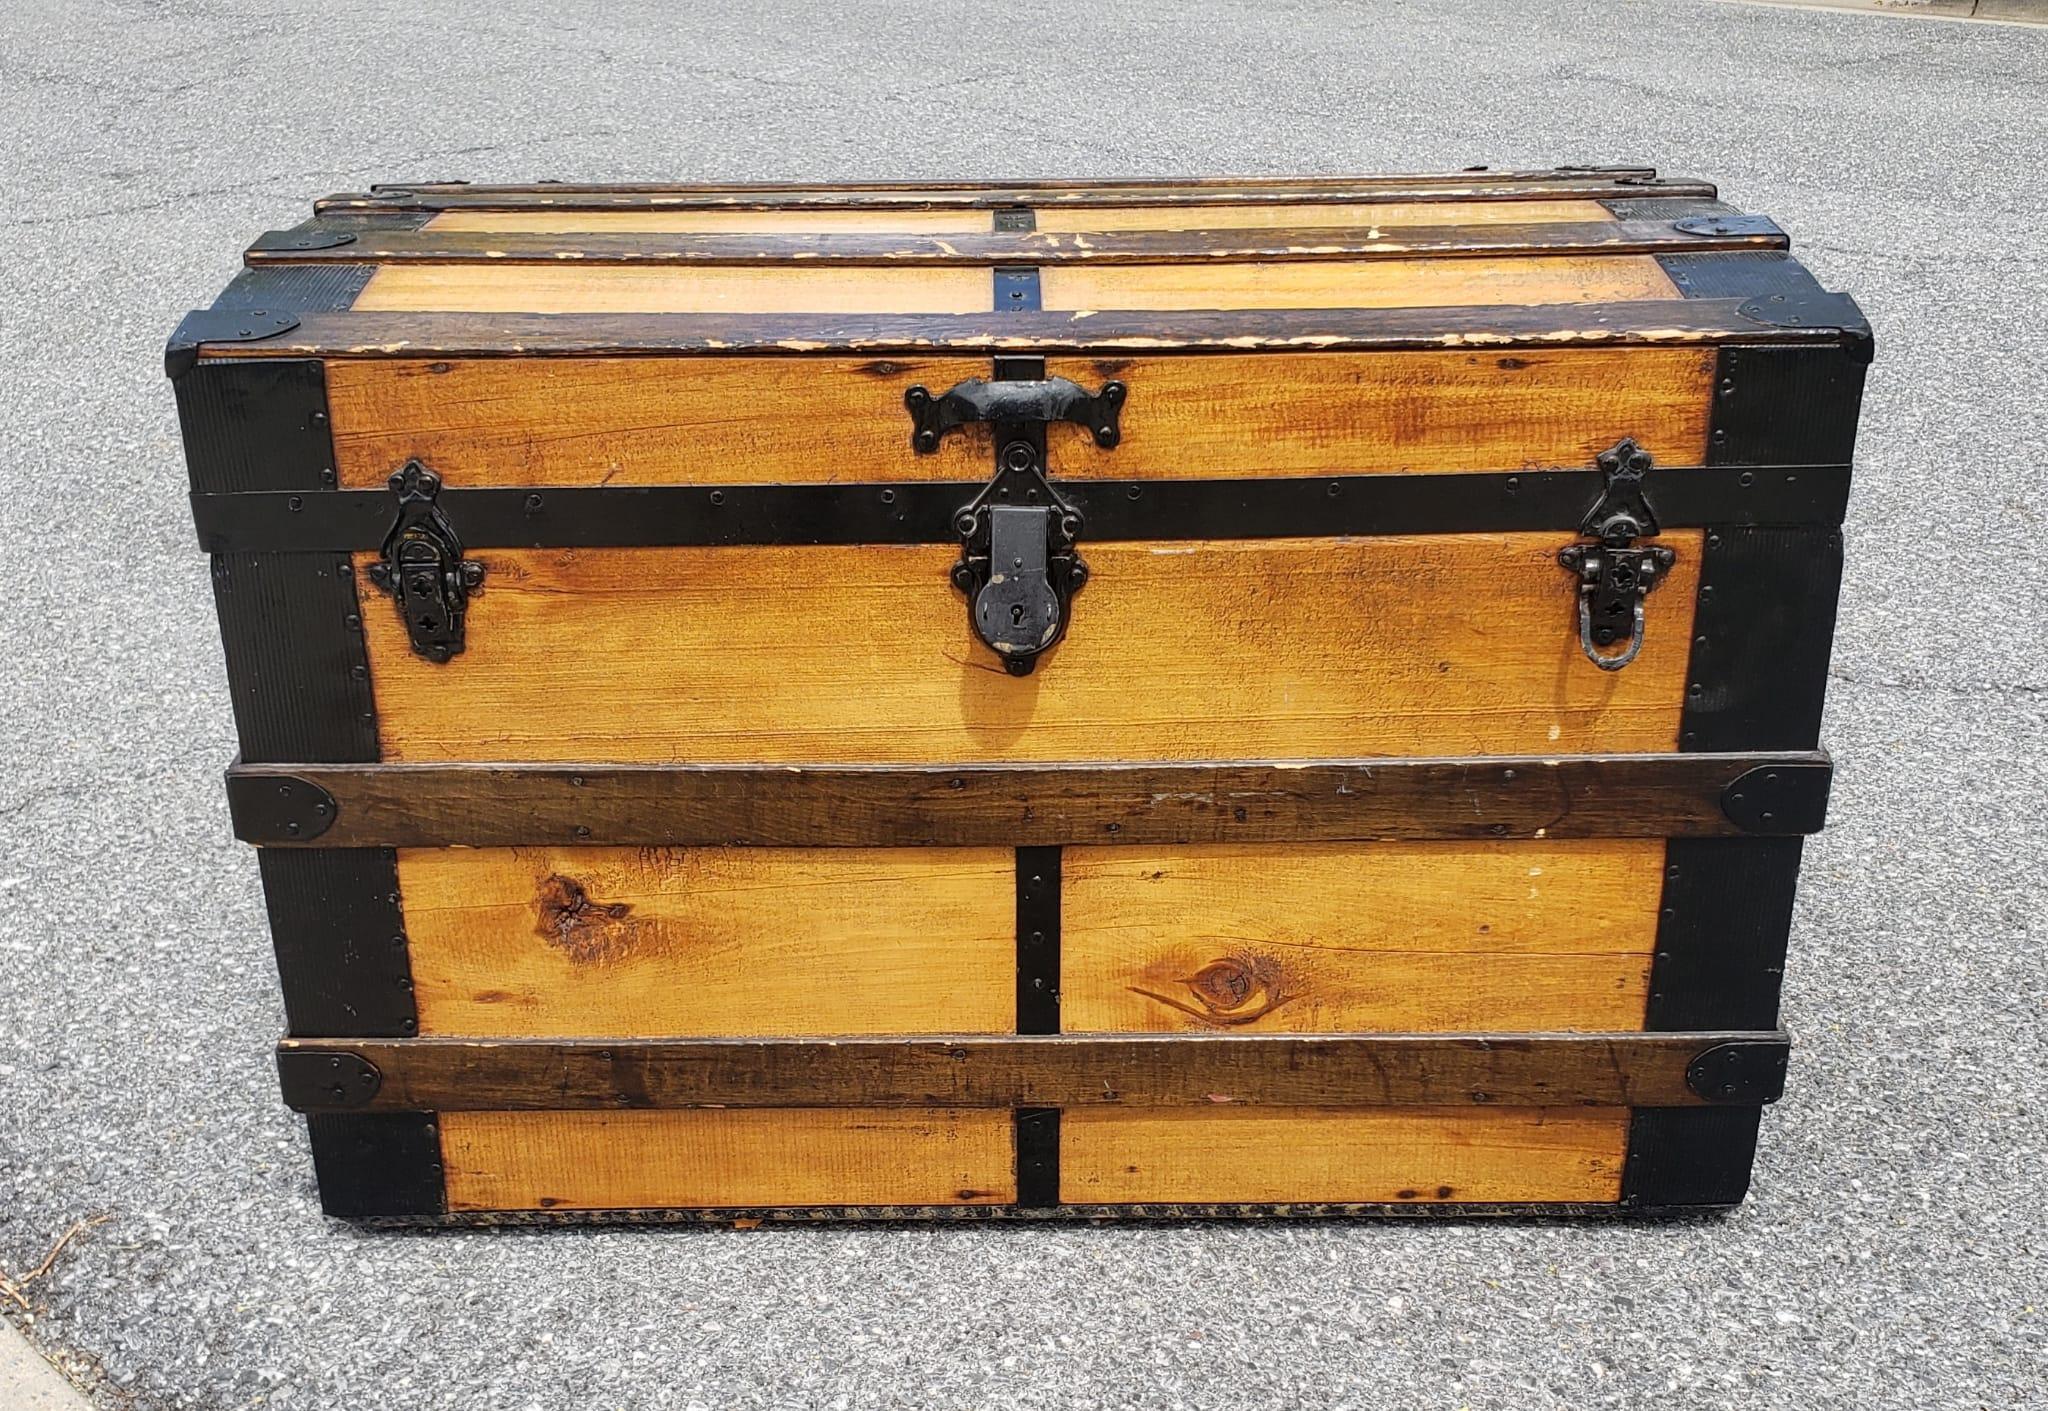 Early 20th Century American Rolling Pine Blanket Chest Storage Trunk In Good Condition For Sale In Germantown, MD